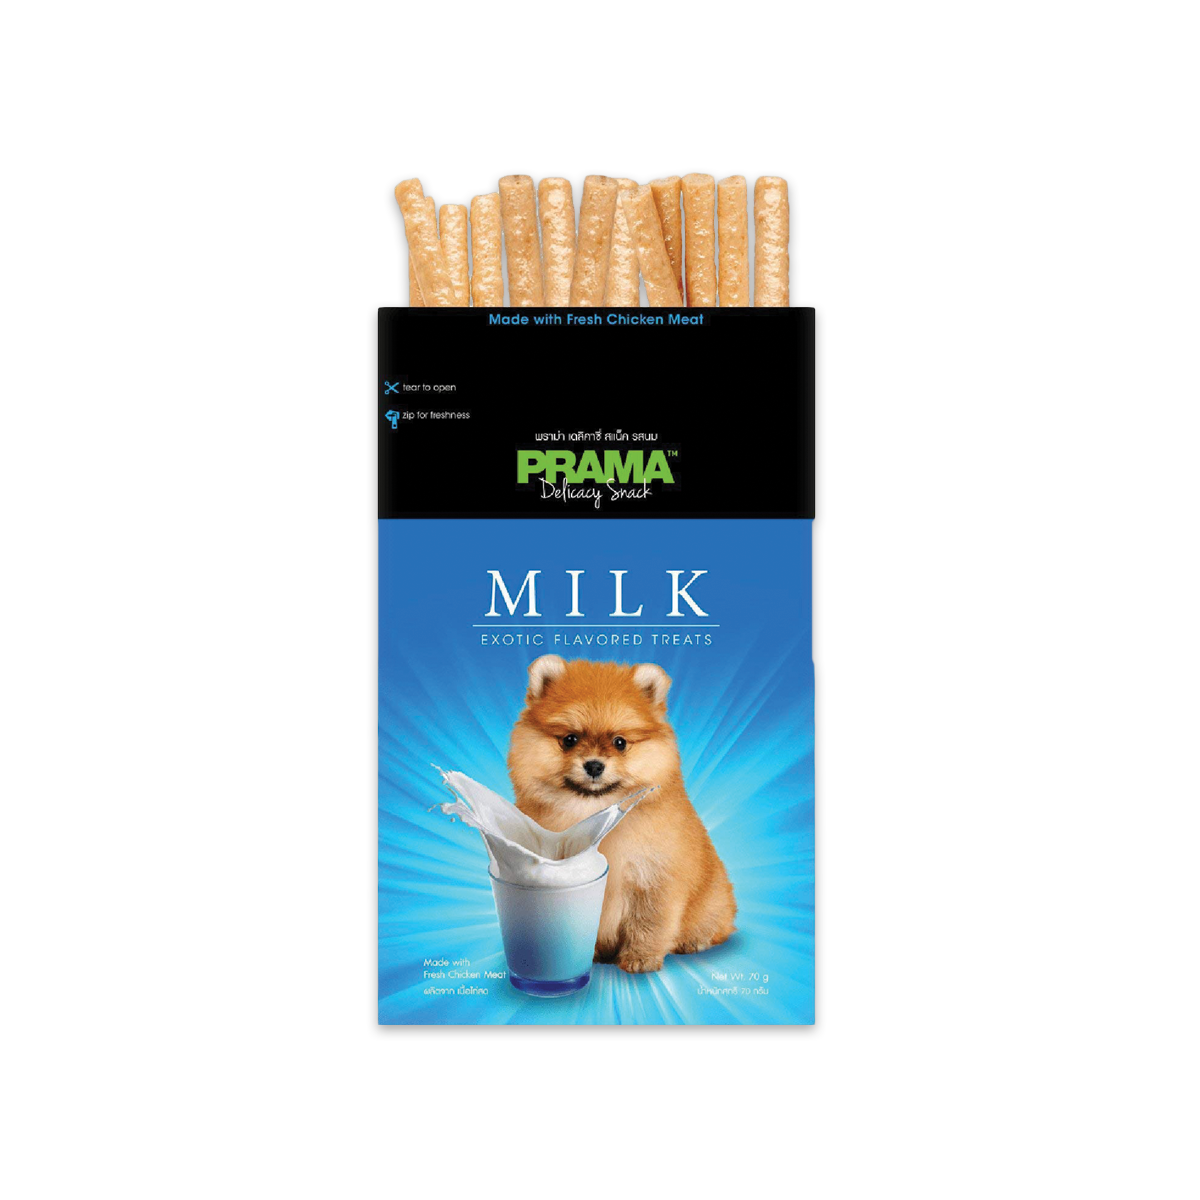 are cigarettes made out of dog poop and cat pee